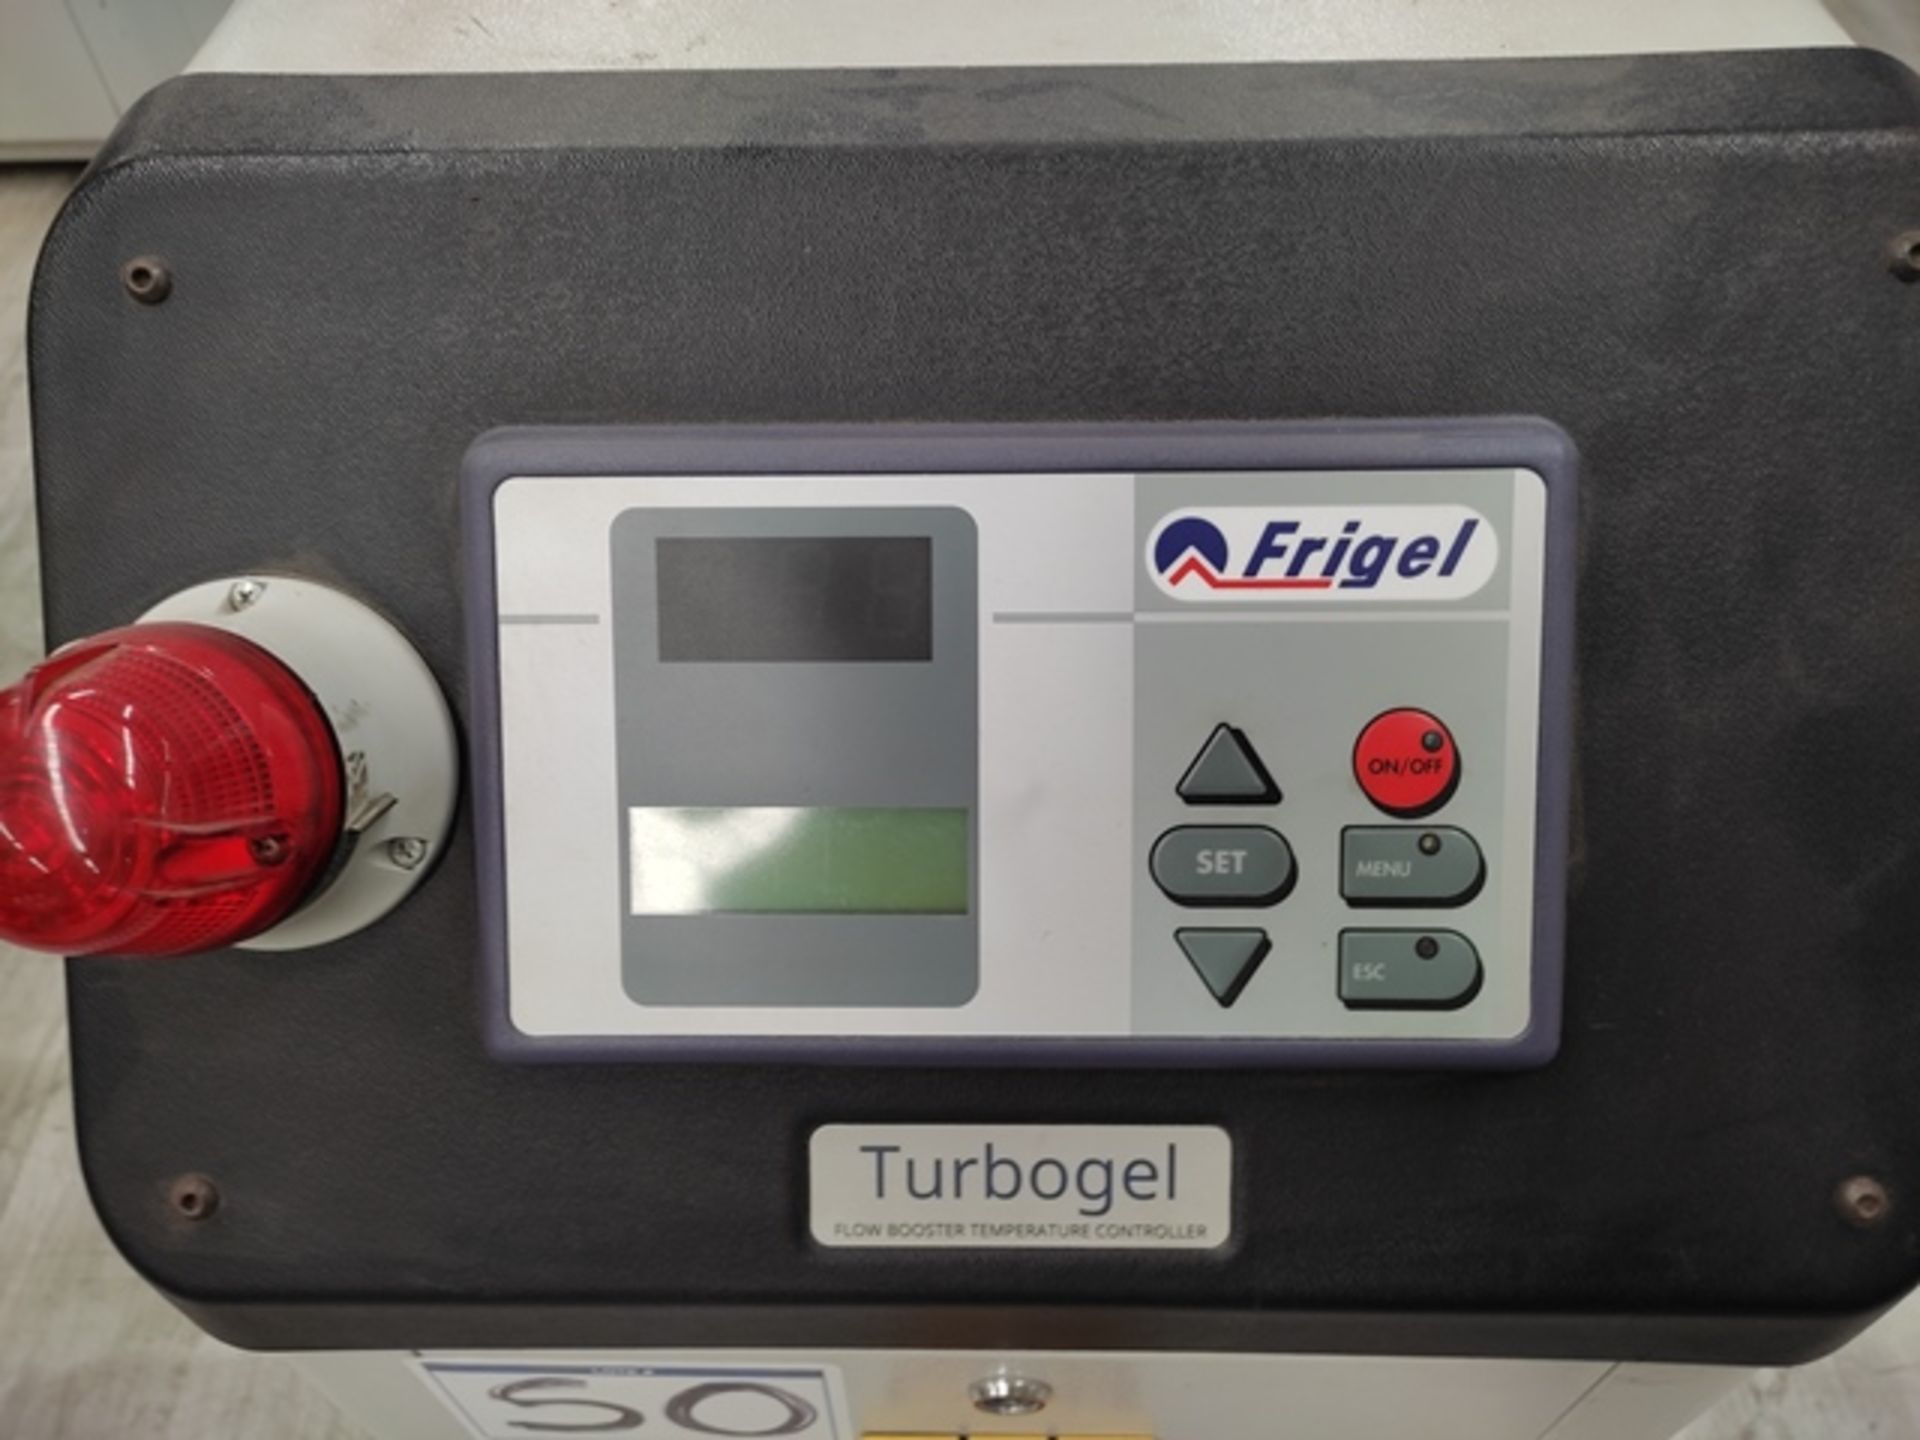 Lot of: (2) Frigel RBD130/24 SP 24 KW Flow Booster Temperature Controllers, Mfg. Year: 2017 & 2018 - Image 9 of 11